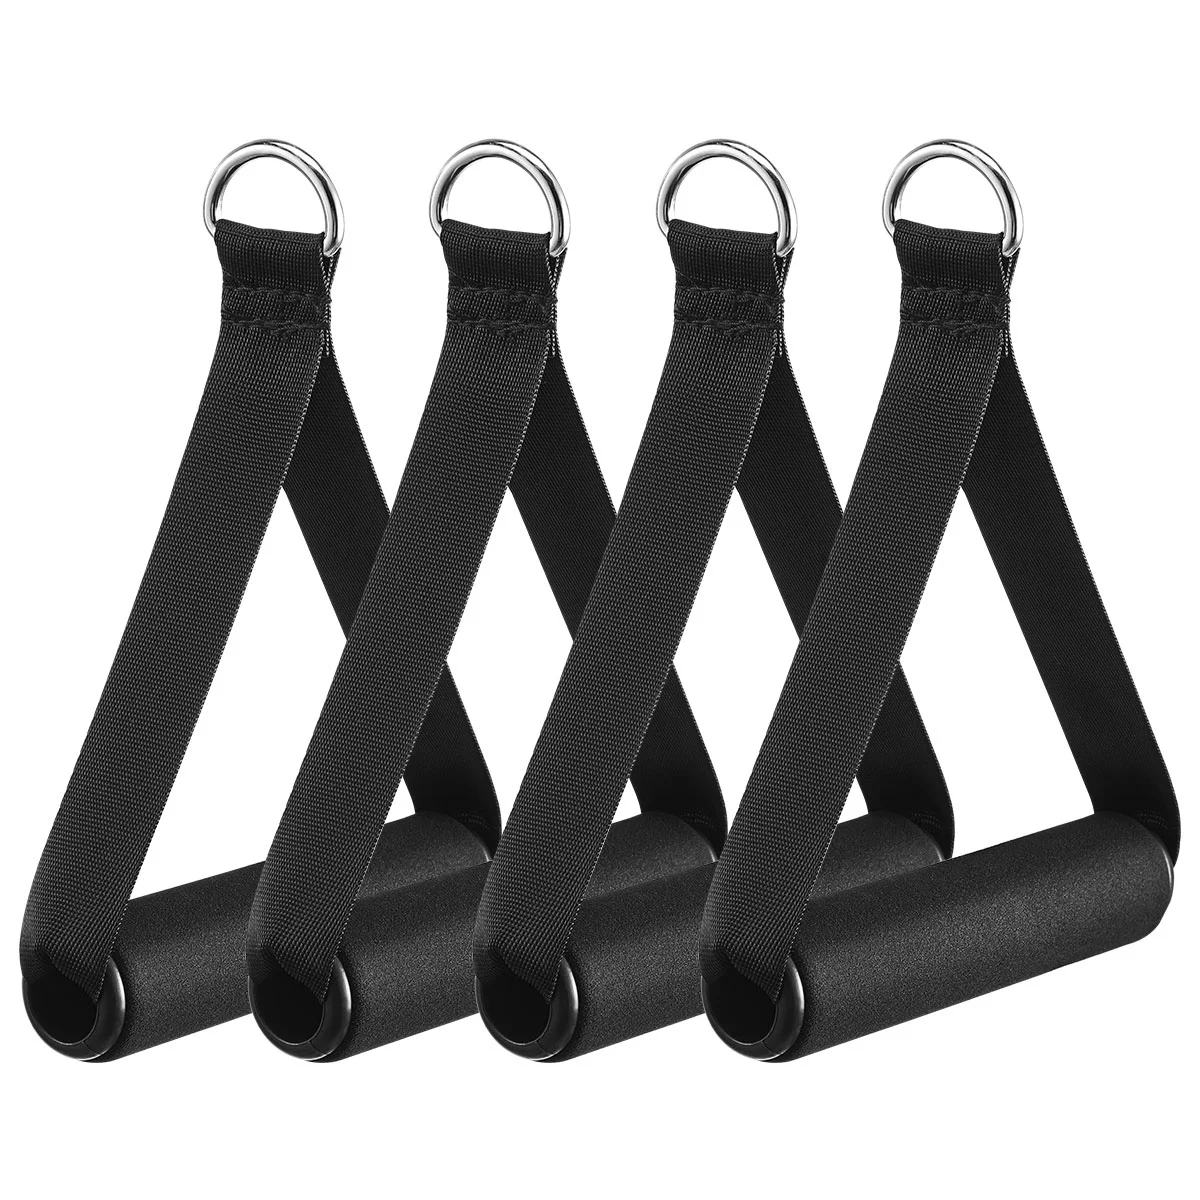 

GARNECK 4Pcs Single-Grip Handles with Carabiner Clips Pull Handle Exercise Handles for Resistance Tube Exercise Strength